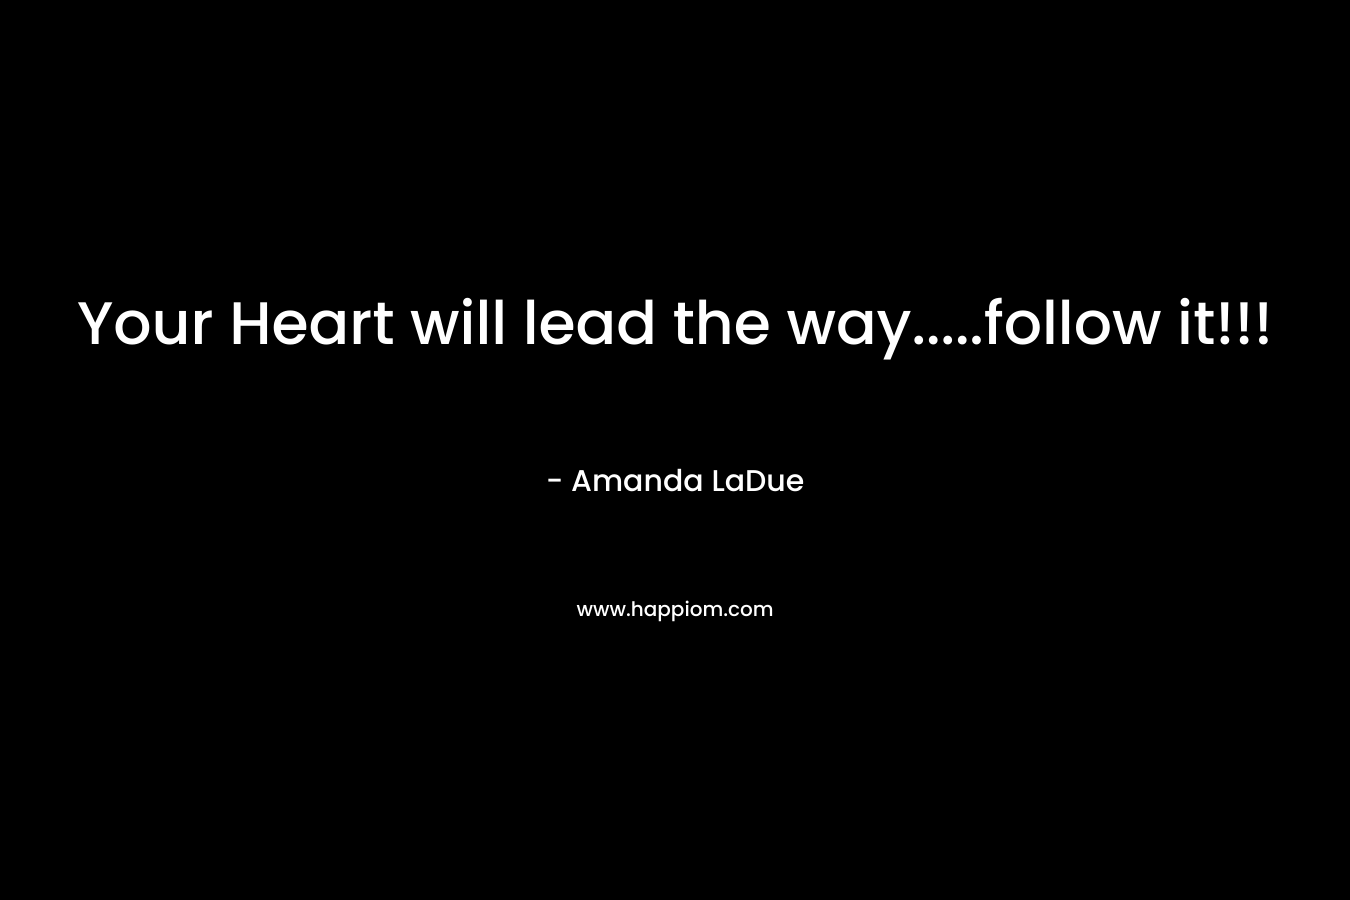 Your Heart will lead the way.....follow it!!!